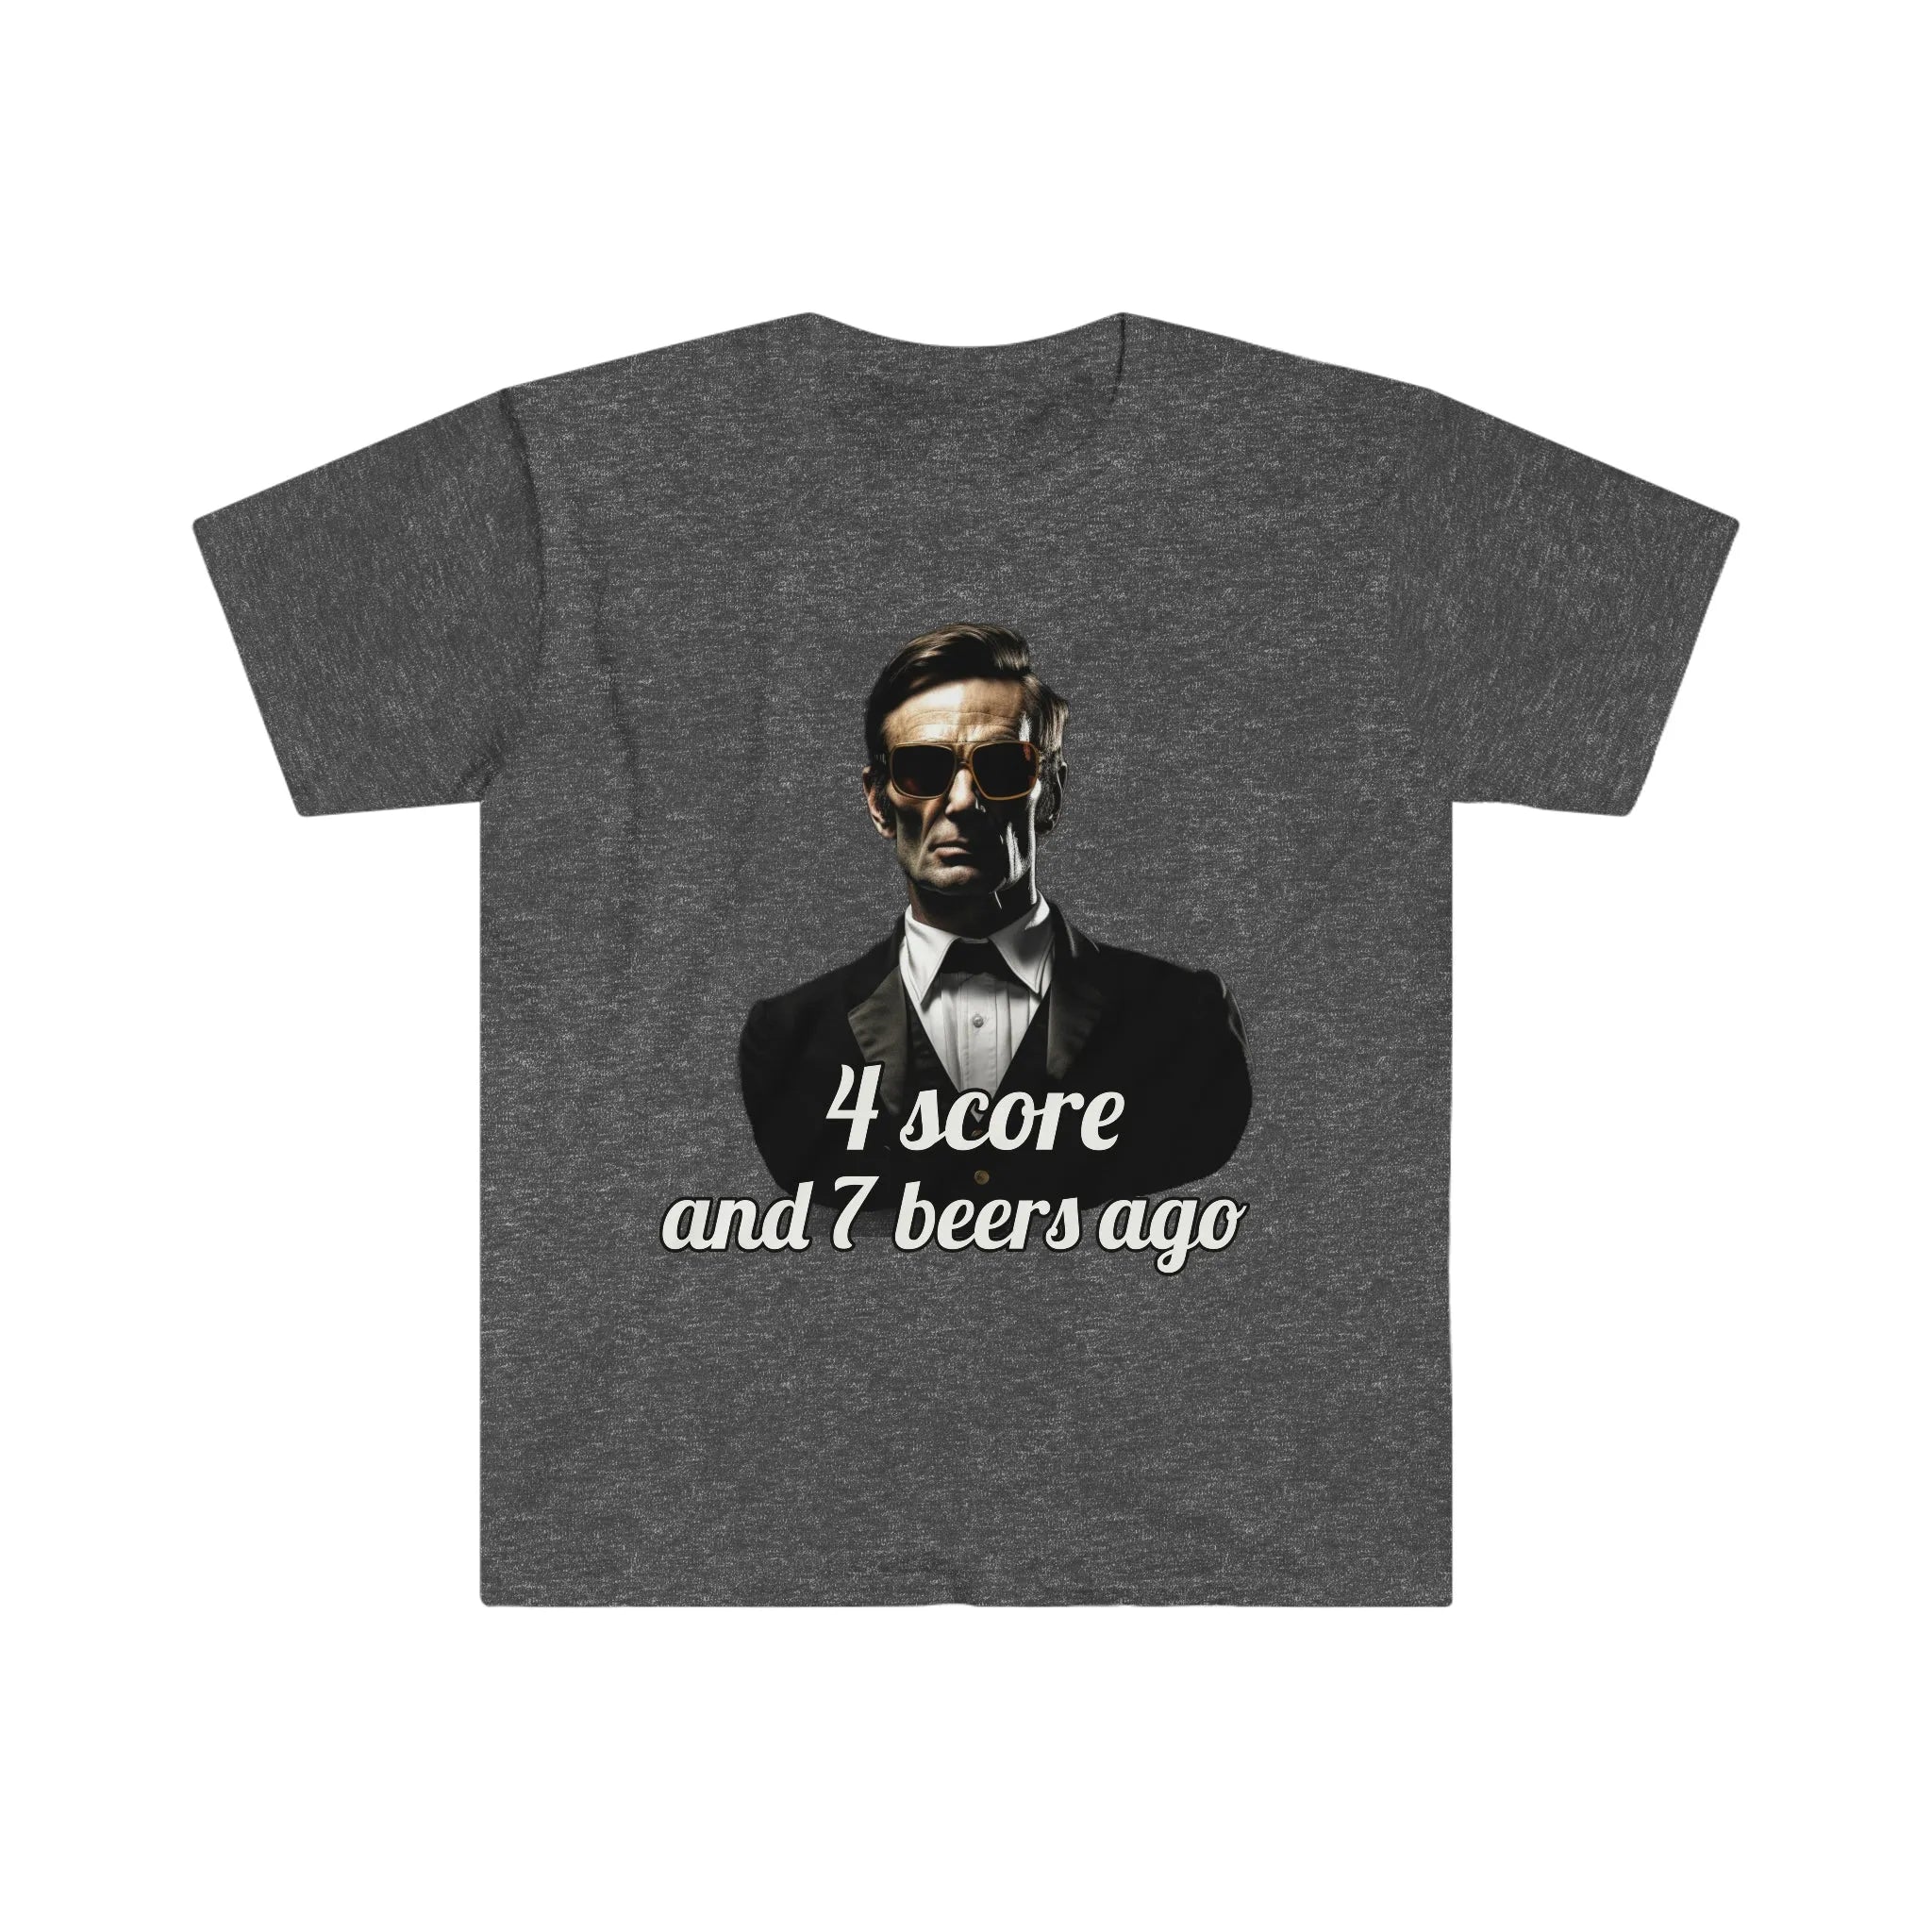 Abraham Lincoln 4 Score and 7 Beers Ago T-shirt